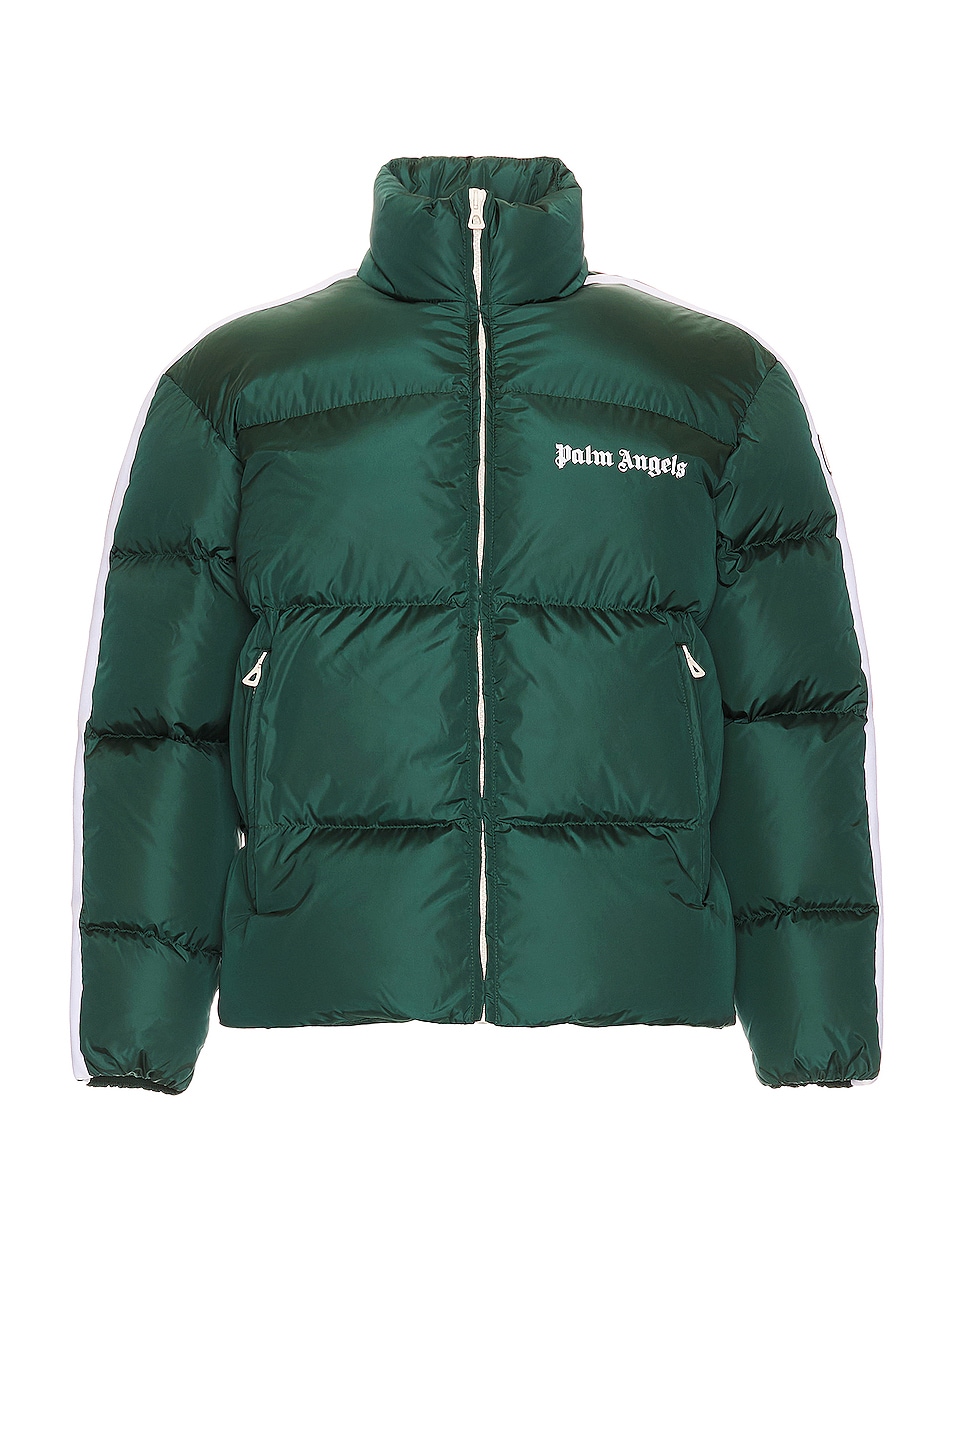 Image 1 of Palm Angels Classic Track Down Jacket in Green & White